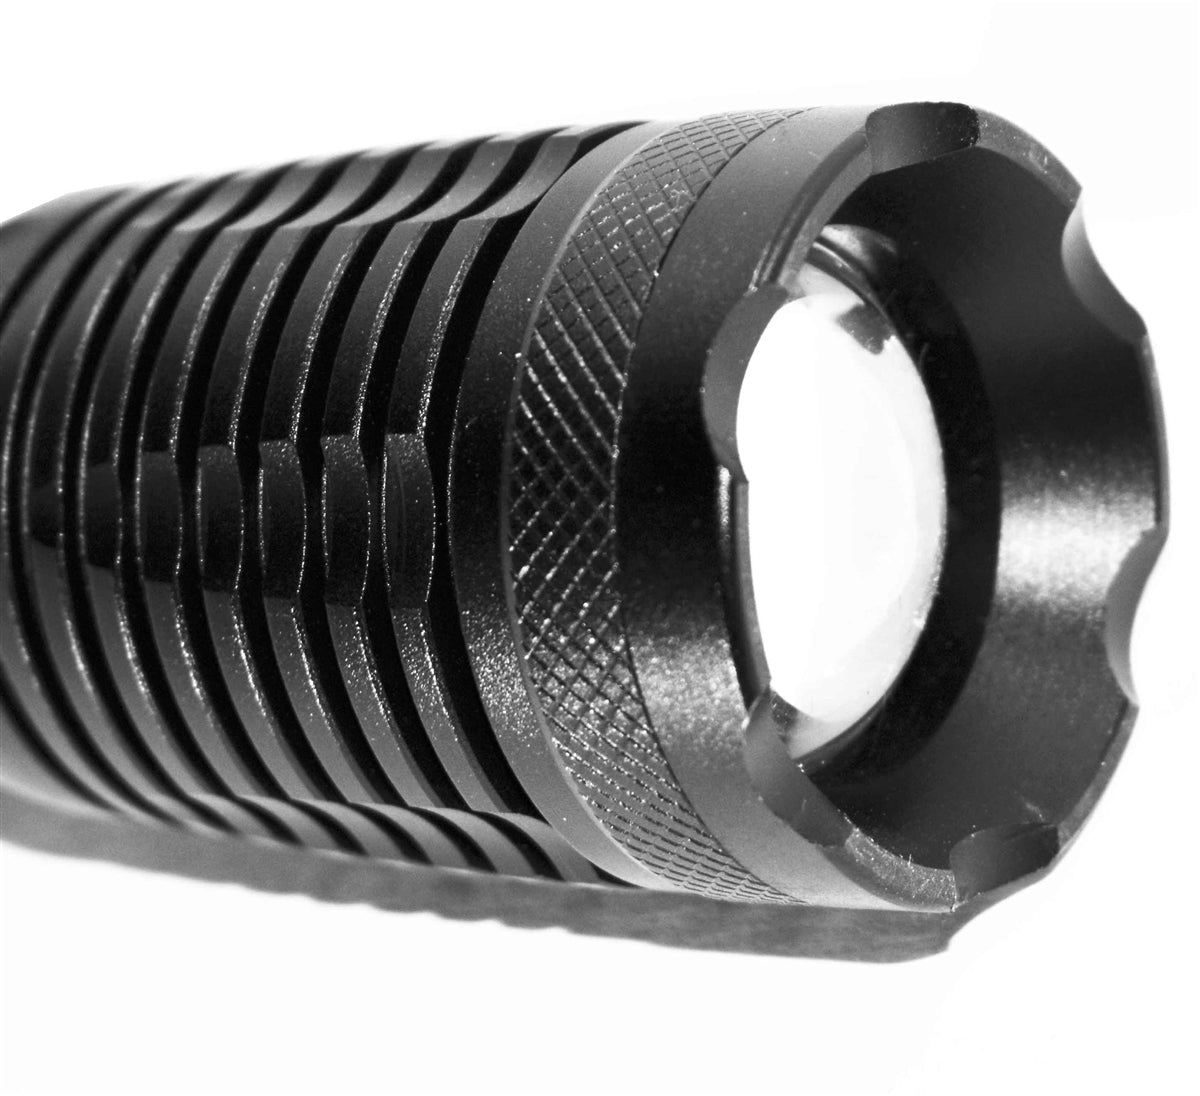 Tactical 1500 Lumen Flashlight With Mount Compatible With Mossberg 500 12 Gauge Shotgun. - TRINITY SUPPLY INC